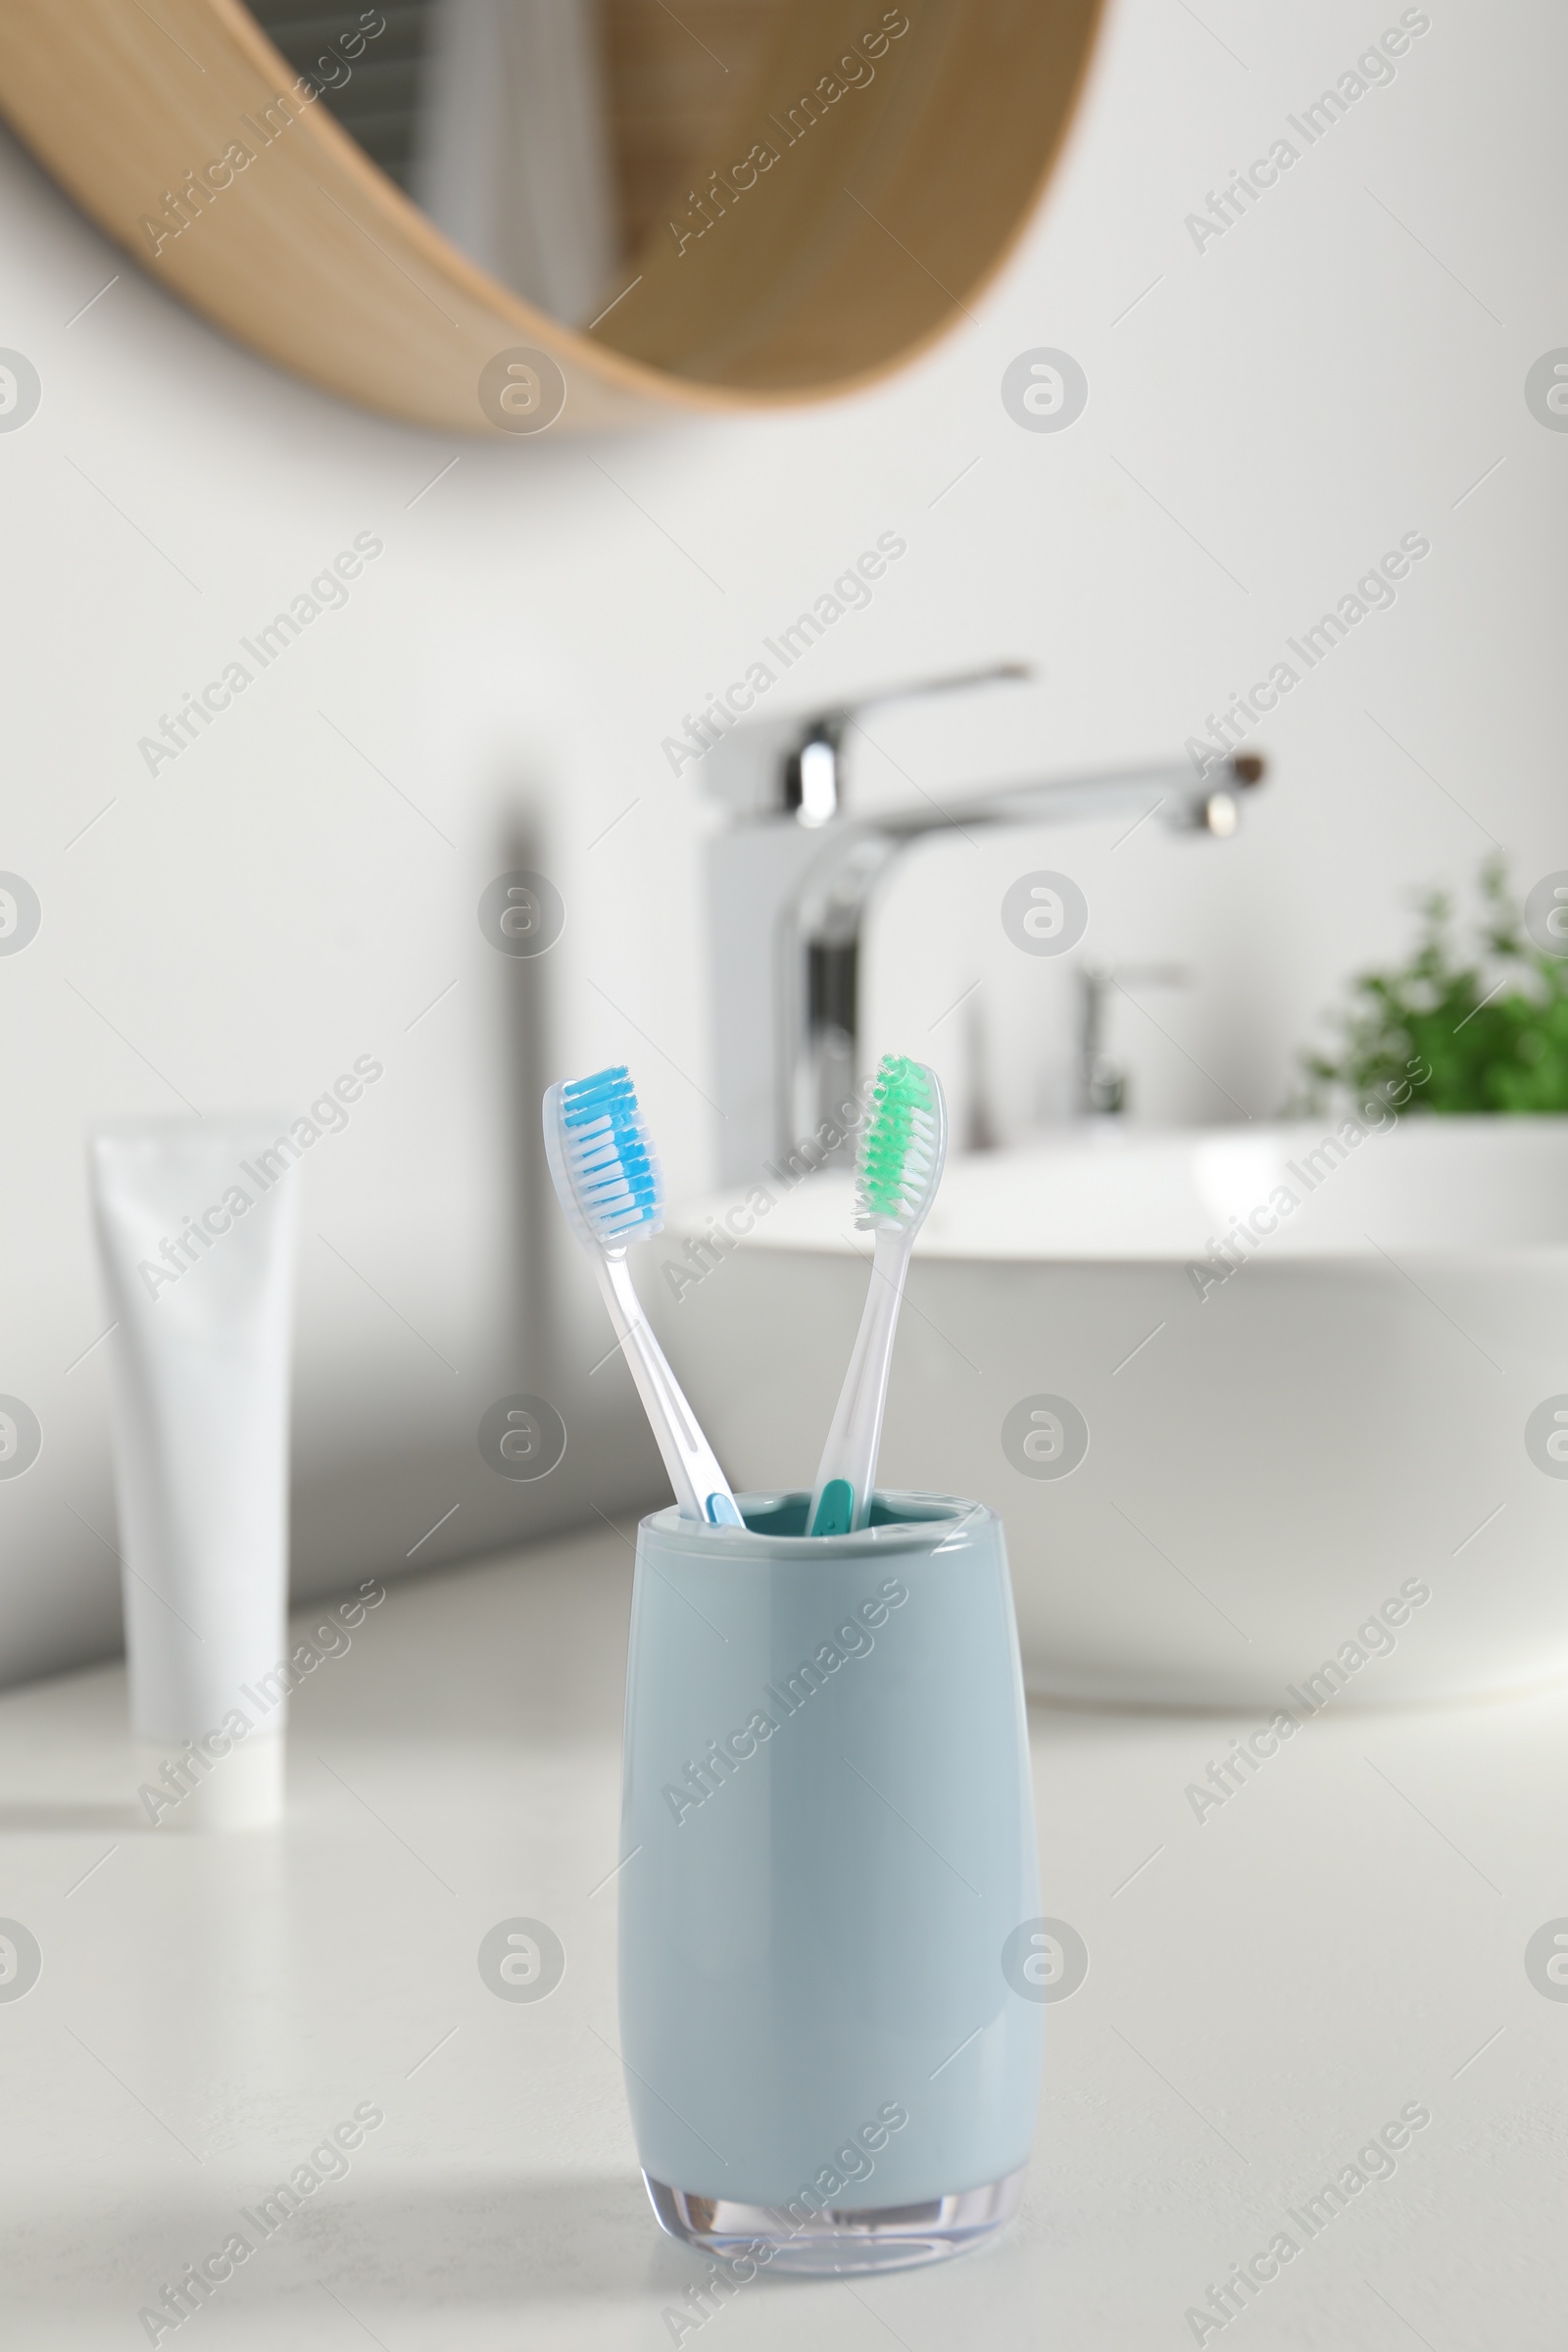 Photo of Plastic toothbrushes on white countertop in bathroom